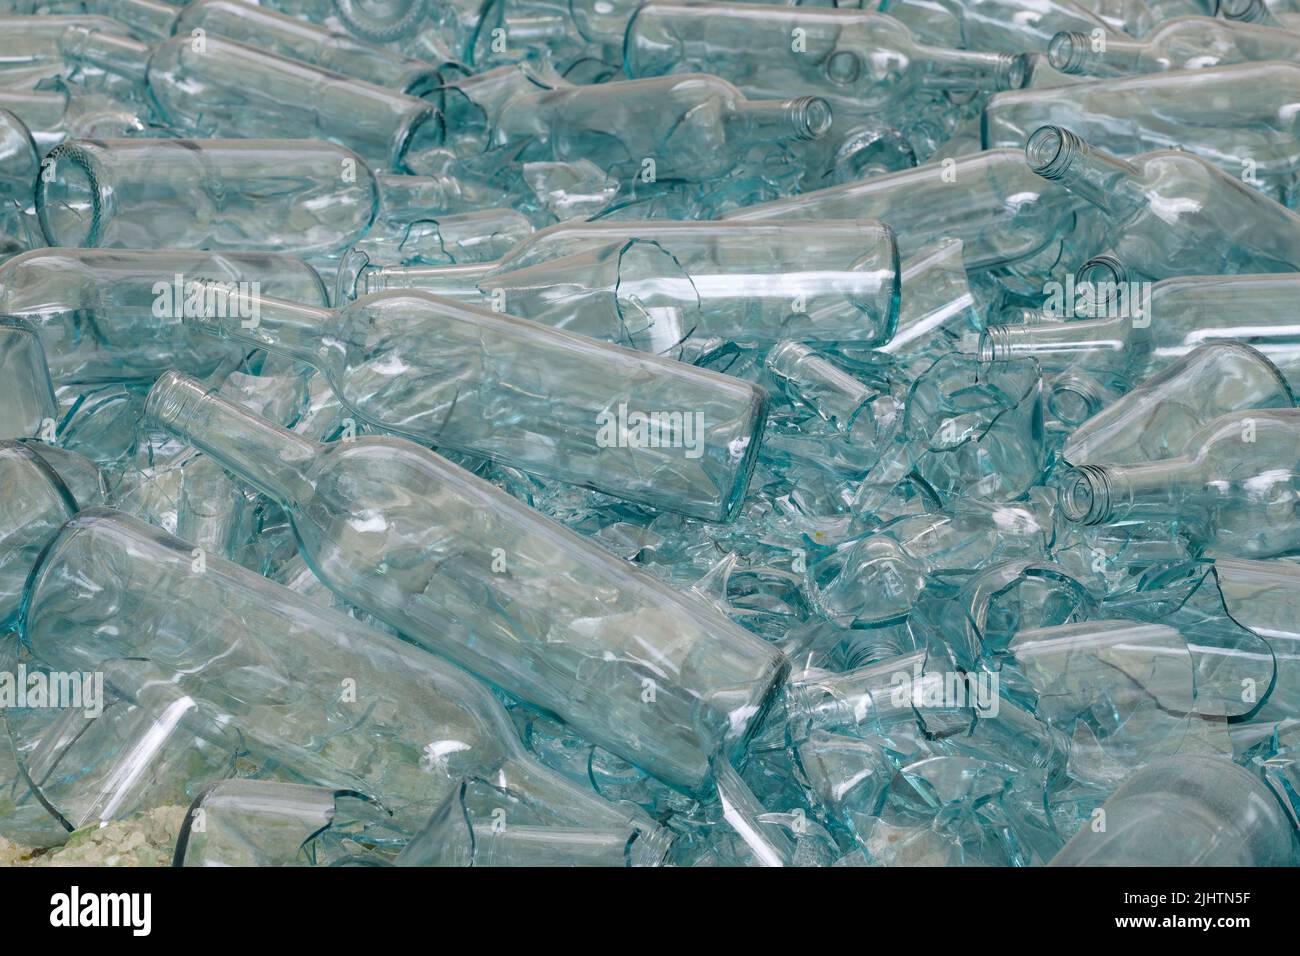 Large pile of blue tinted glass bottles with some broken at a recycling plant scattered in a random pile Stock Photo